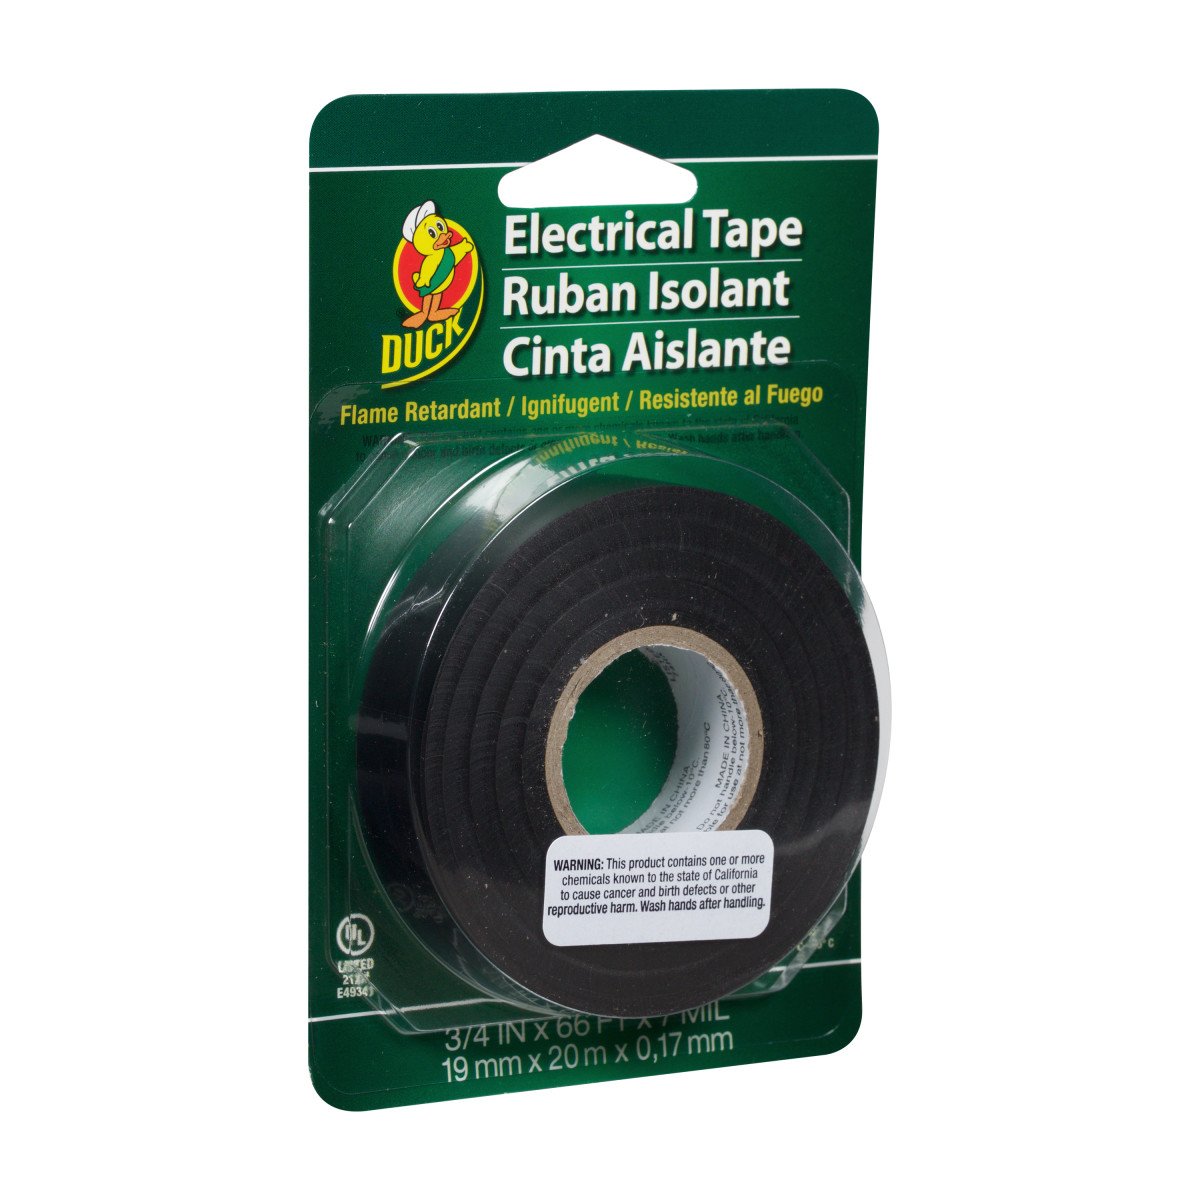 Duck Professional Black Electrical Tape - Shop Adhesives & Tape at H-E-B